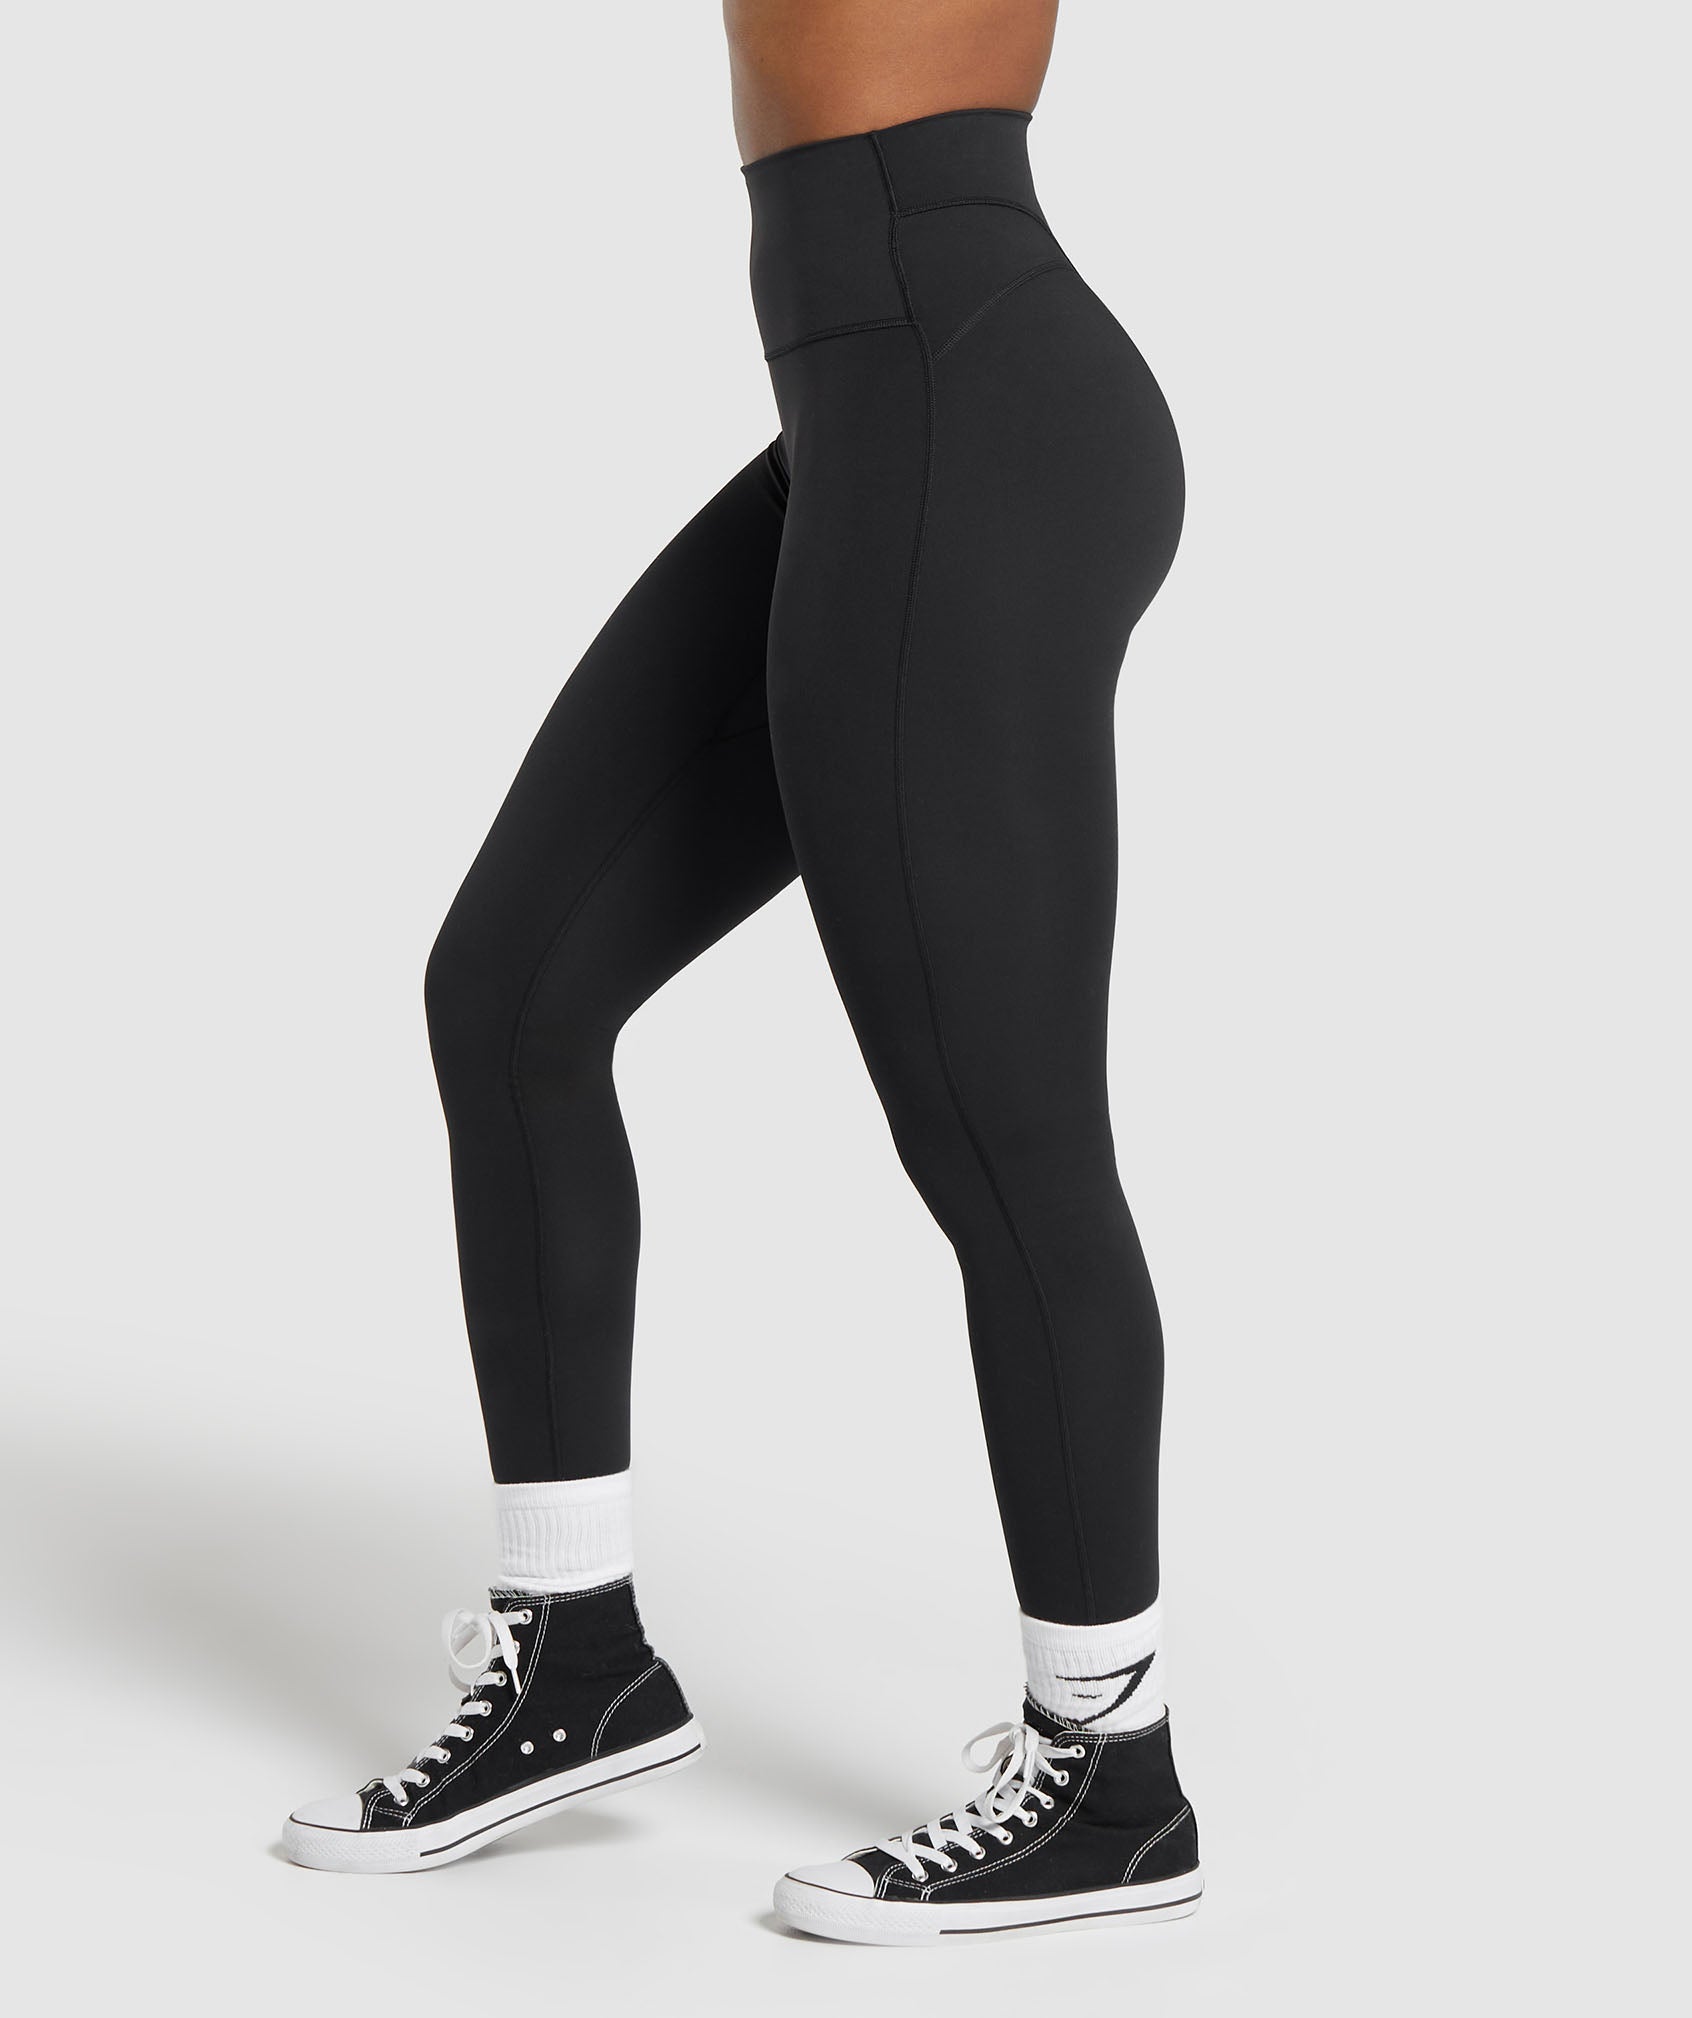 Gymshark Speed Leggings Red Size XS - $25 (50% Off Retail) - From kassidy